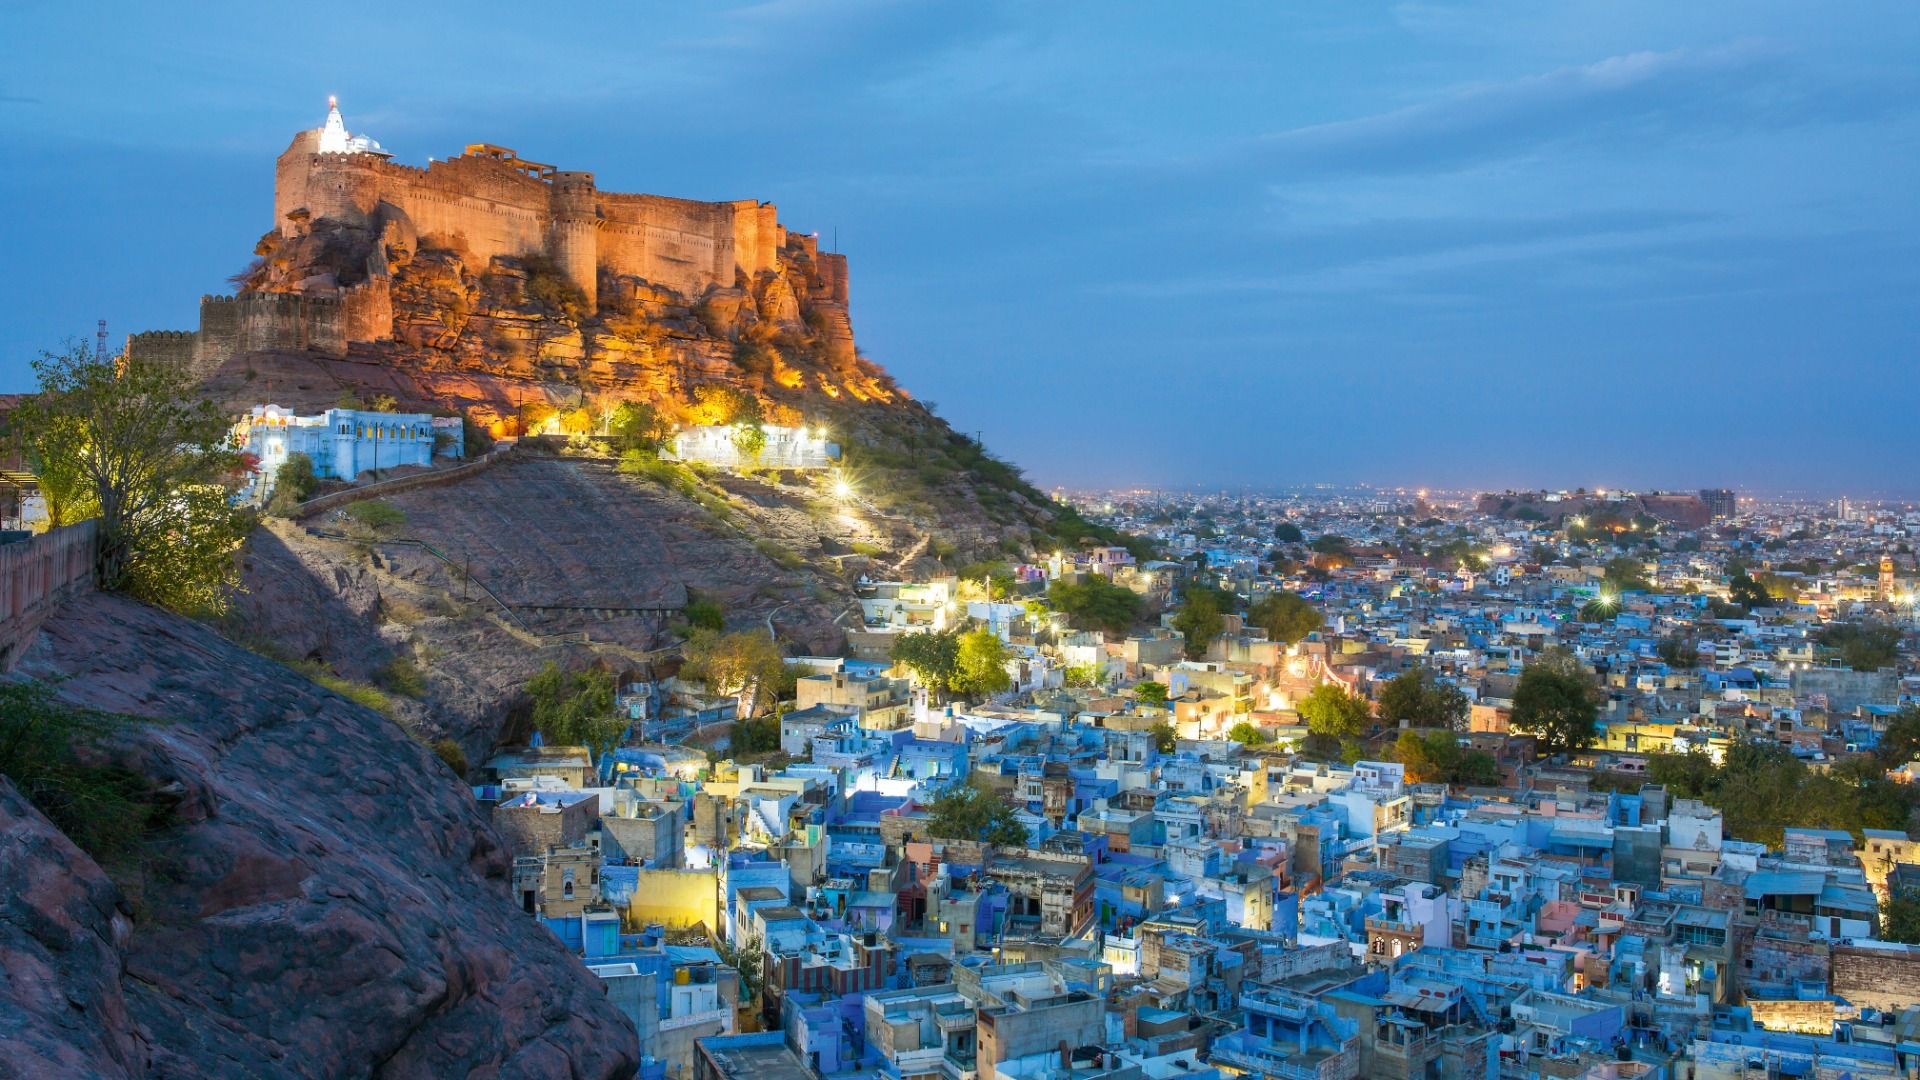 Jodhpur's Conscious Steps, As Showcased In The City's Local Cuisines